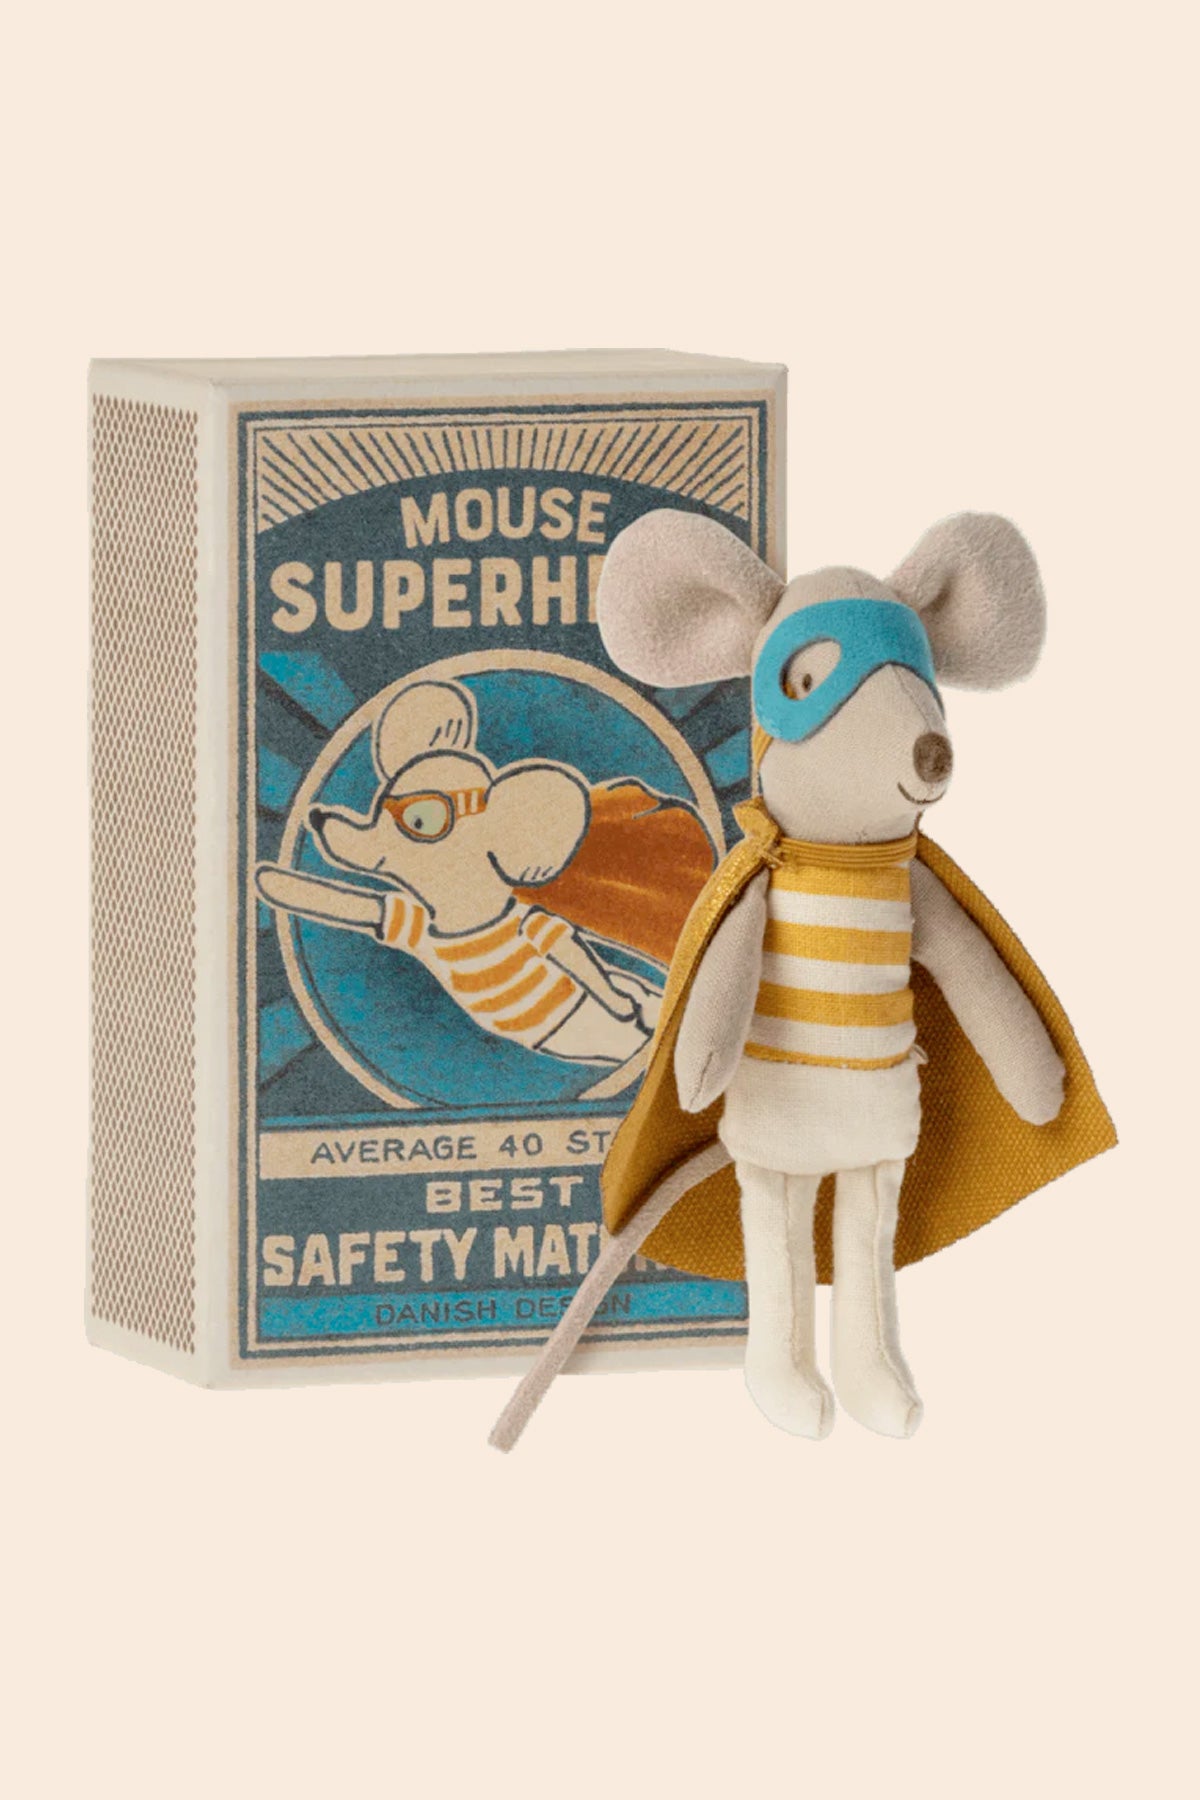 Maileg Super Hero Mouse, Little Brother in Match Box